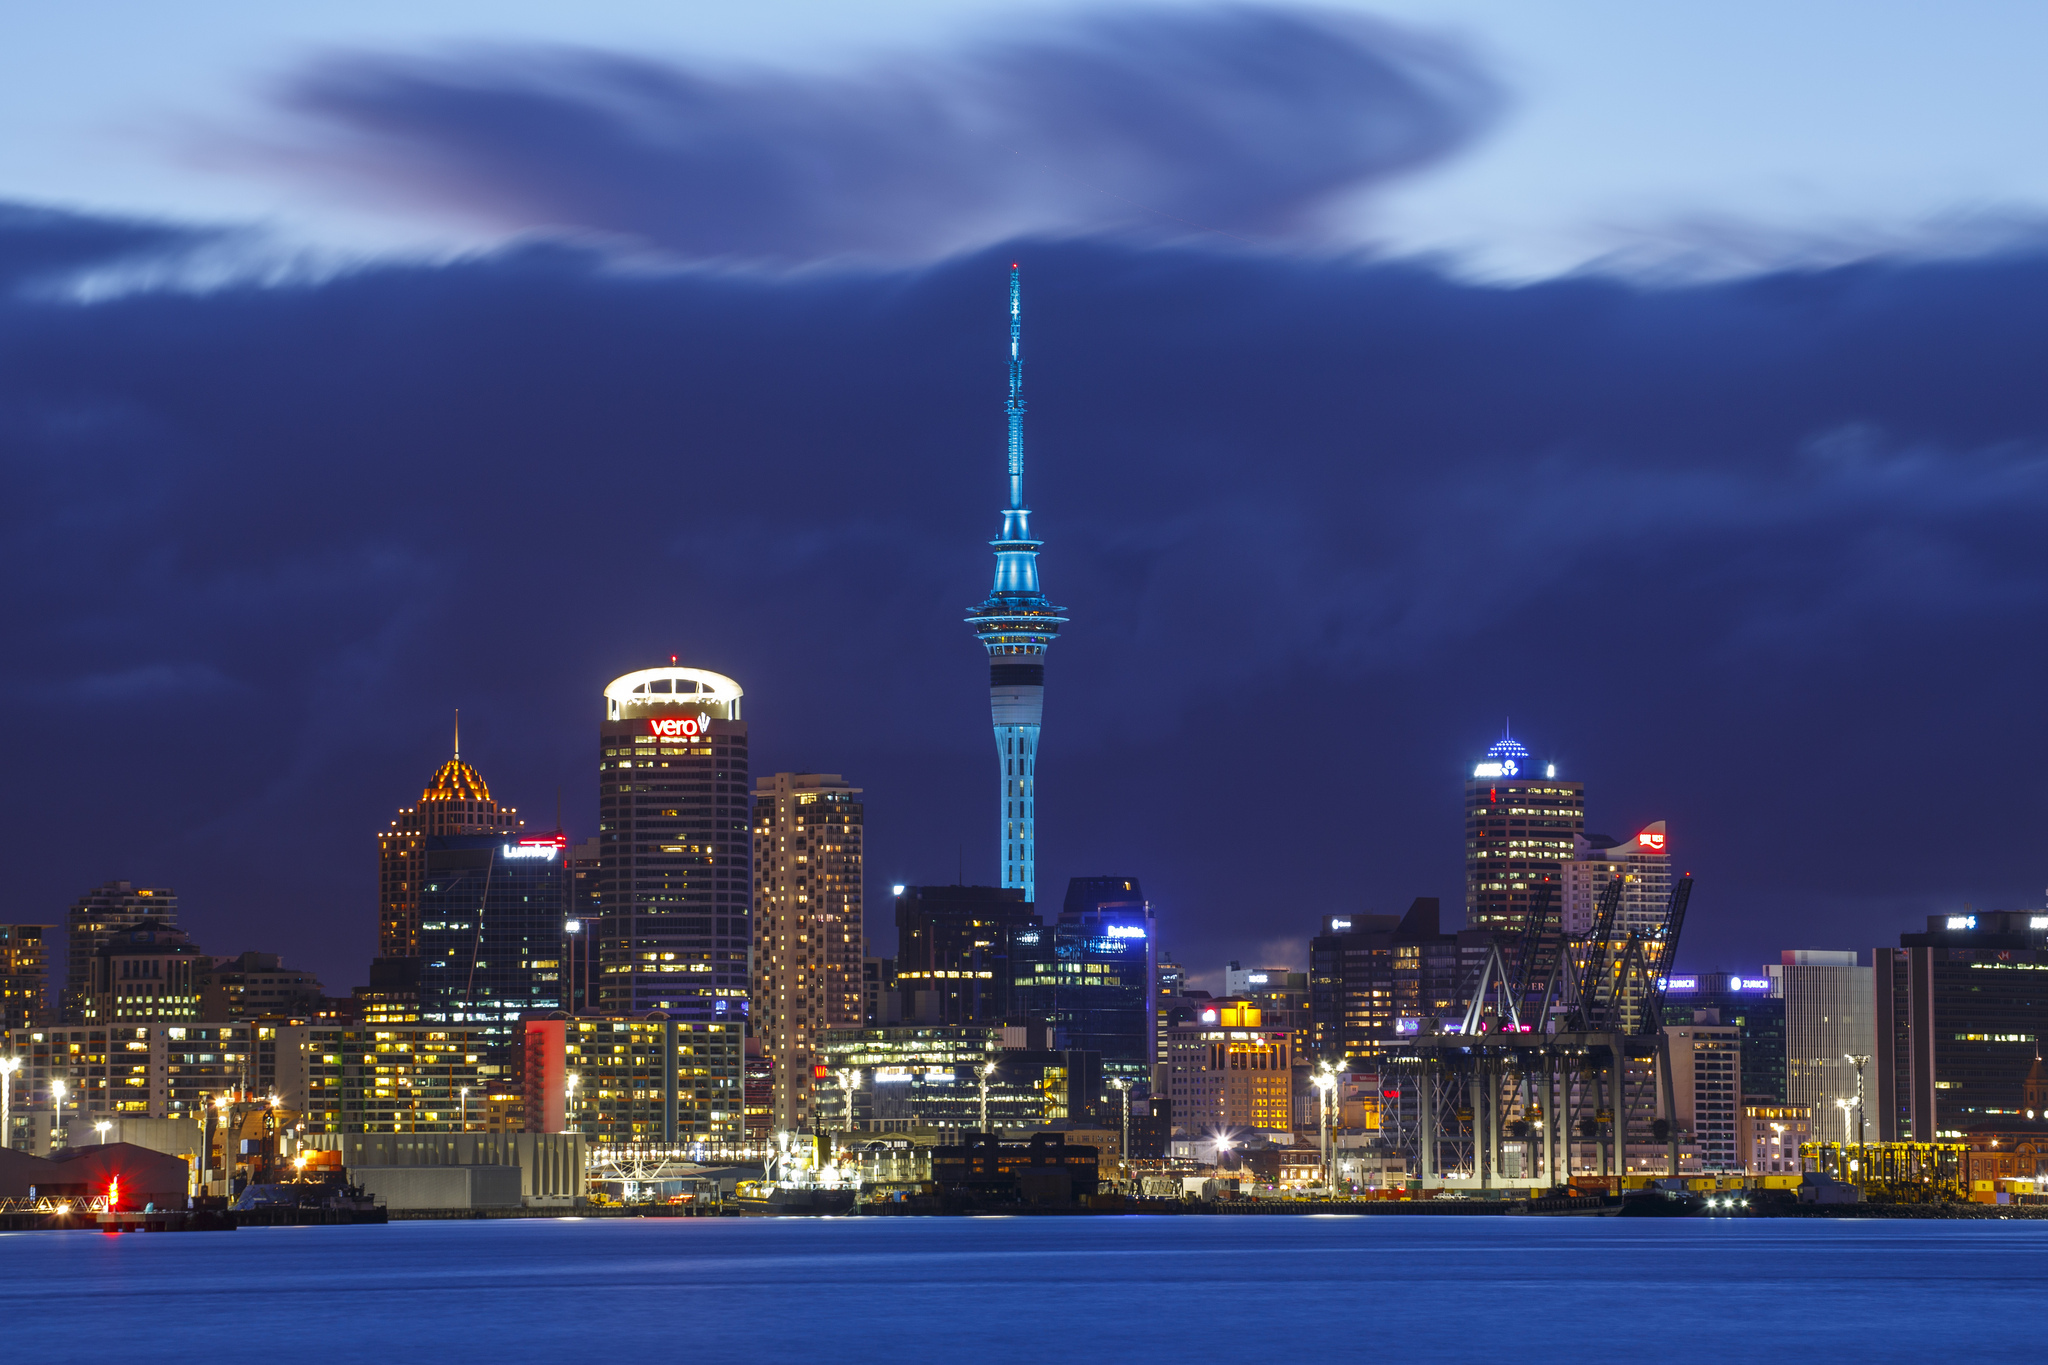 man made, auckland, building, city, new zealand, night, skyscraper, cities High Definition image